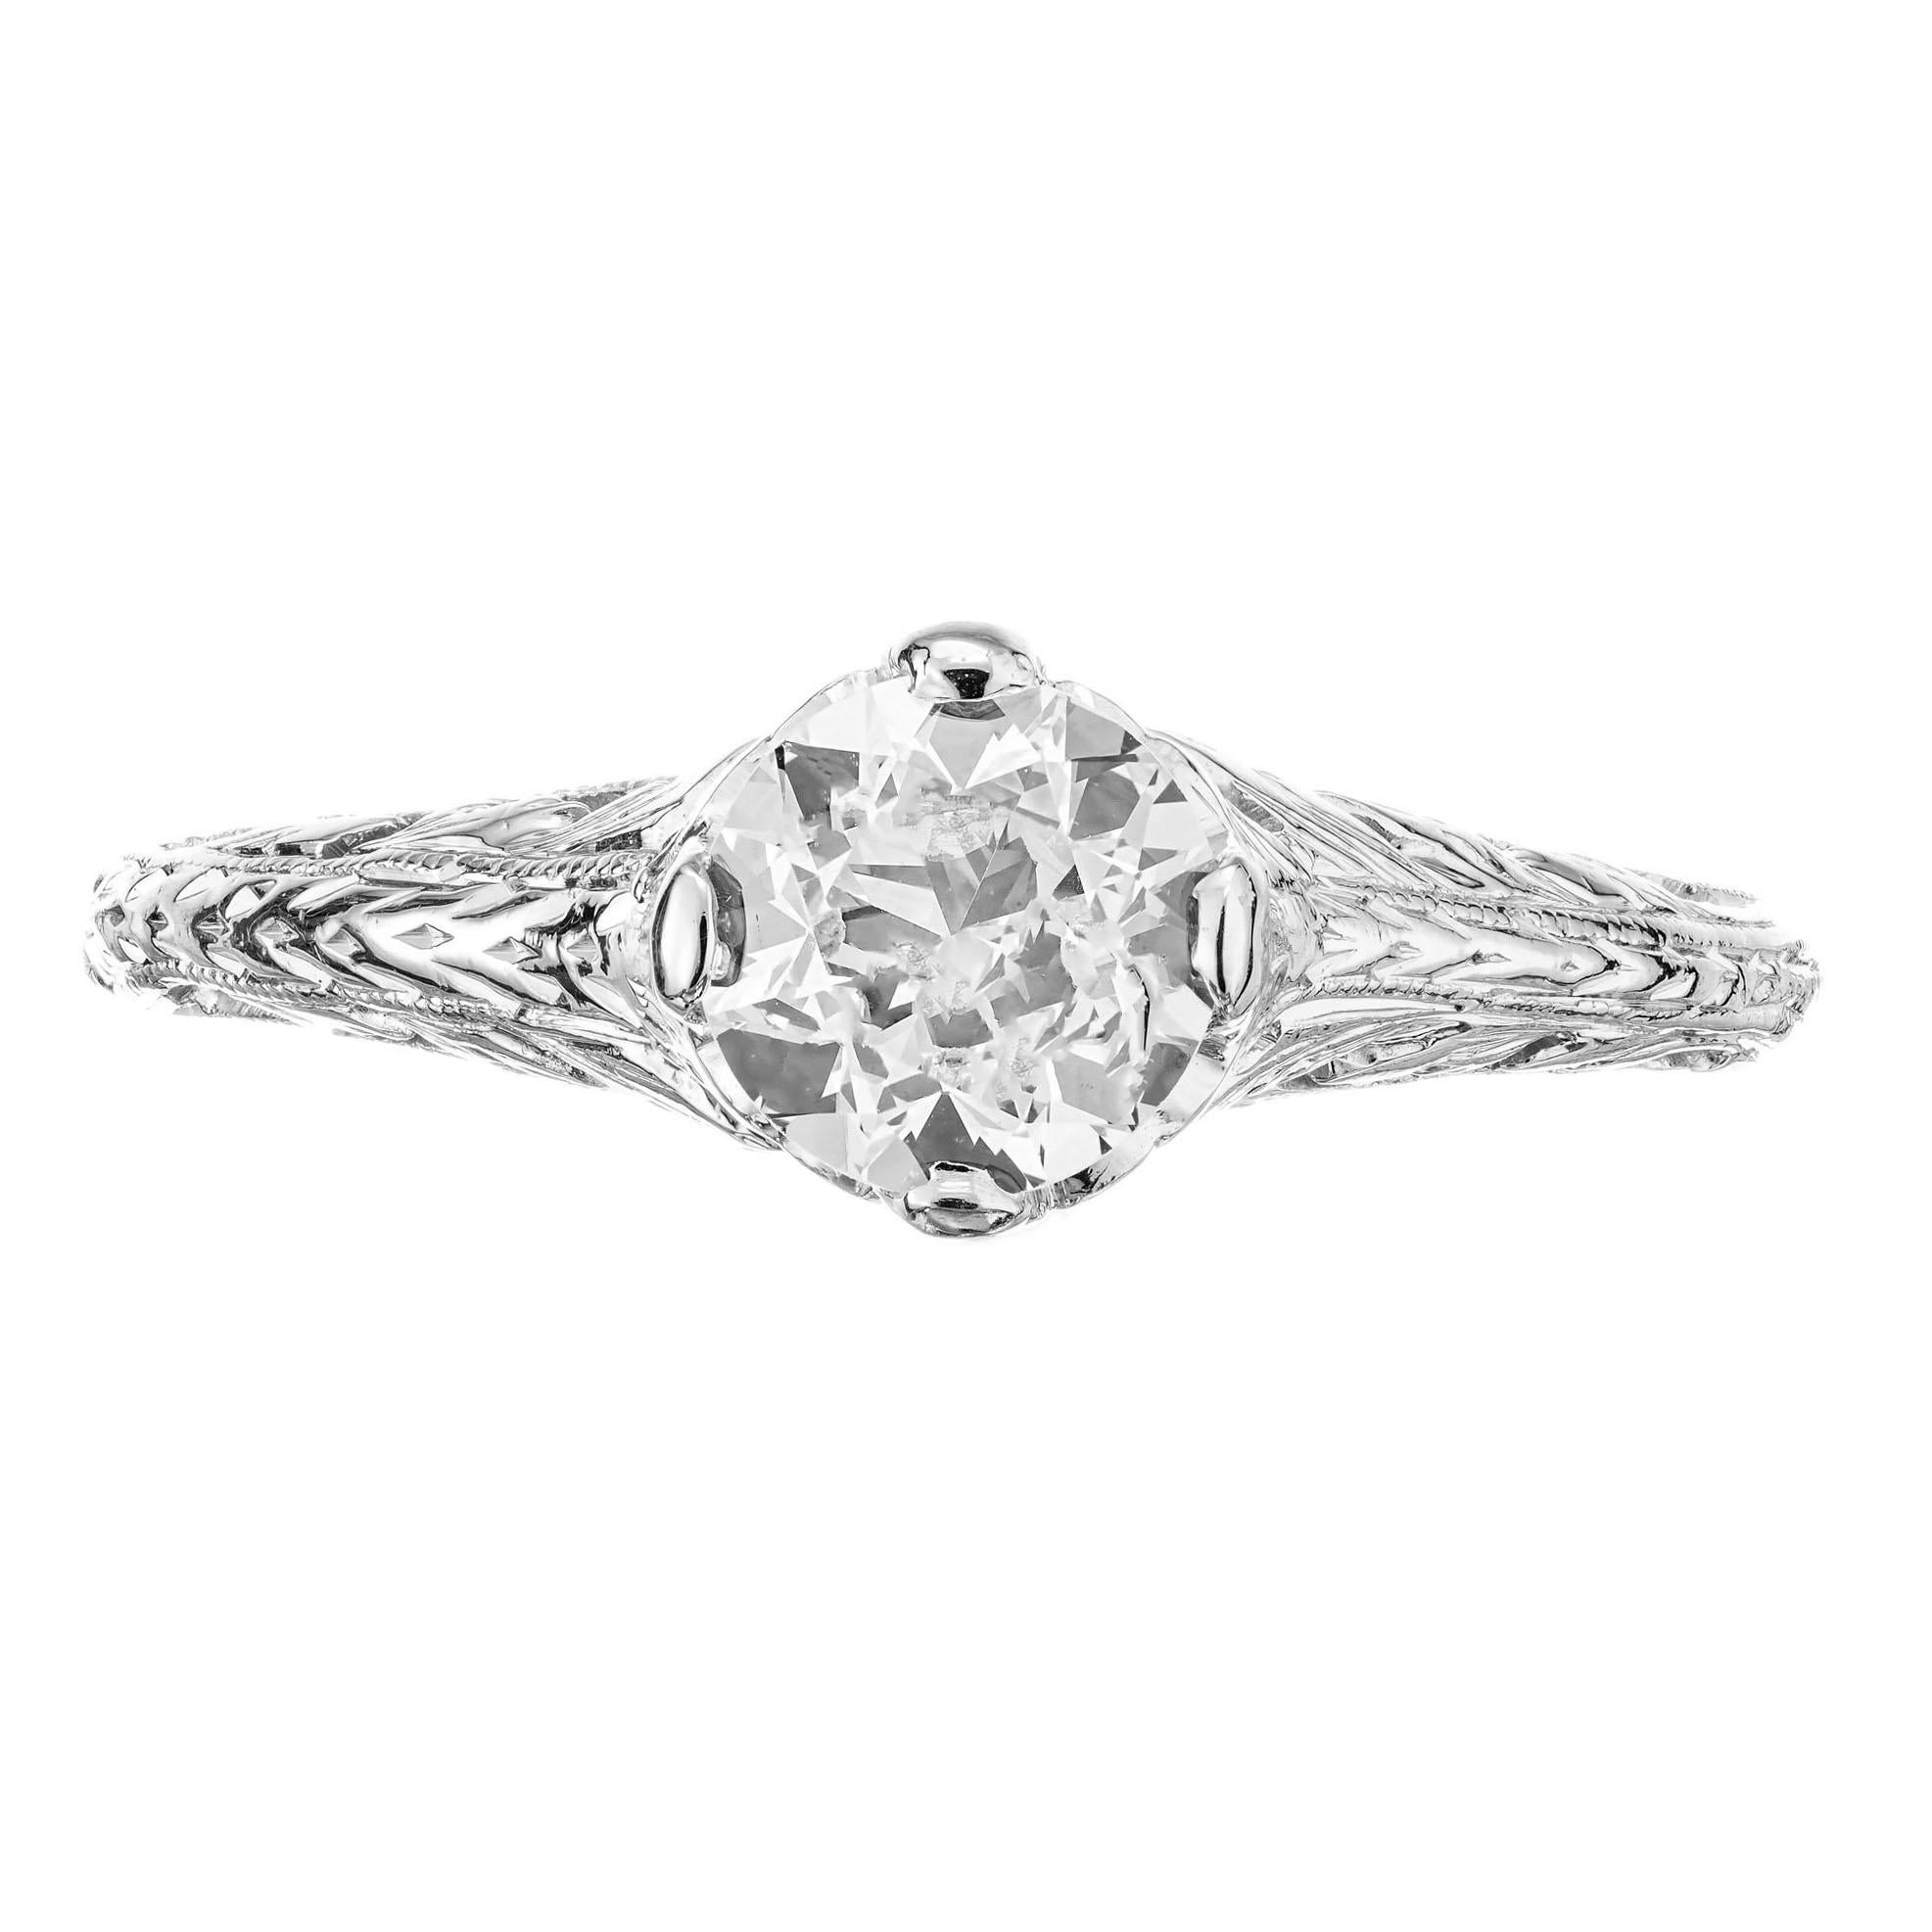 1930's diamond Art Deco engagement ring. EGL certified .63ct center diamond in a handmade platinum engraved setting. Raised crown and small table. 

1 round brilliant cut diamond, I-J VS approx. .63cts EGL Certificate # 400145988D
Size 6 and